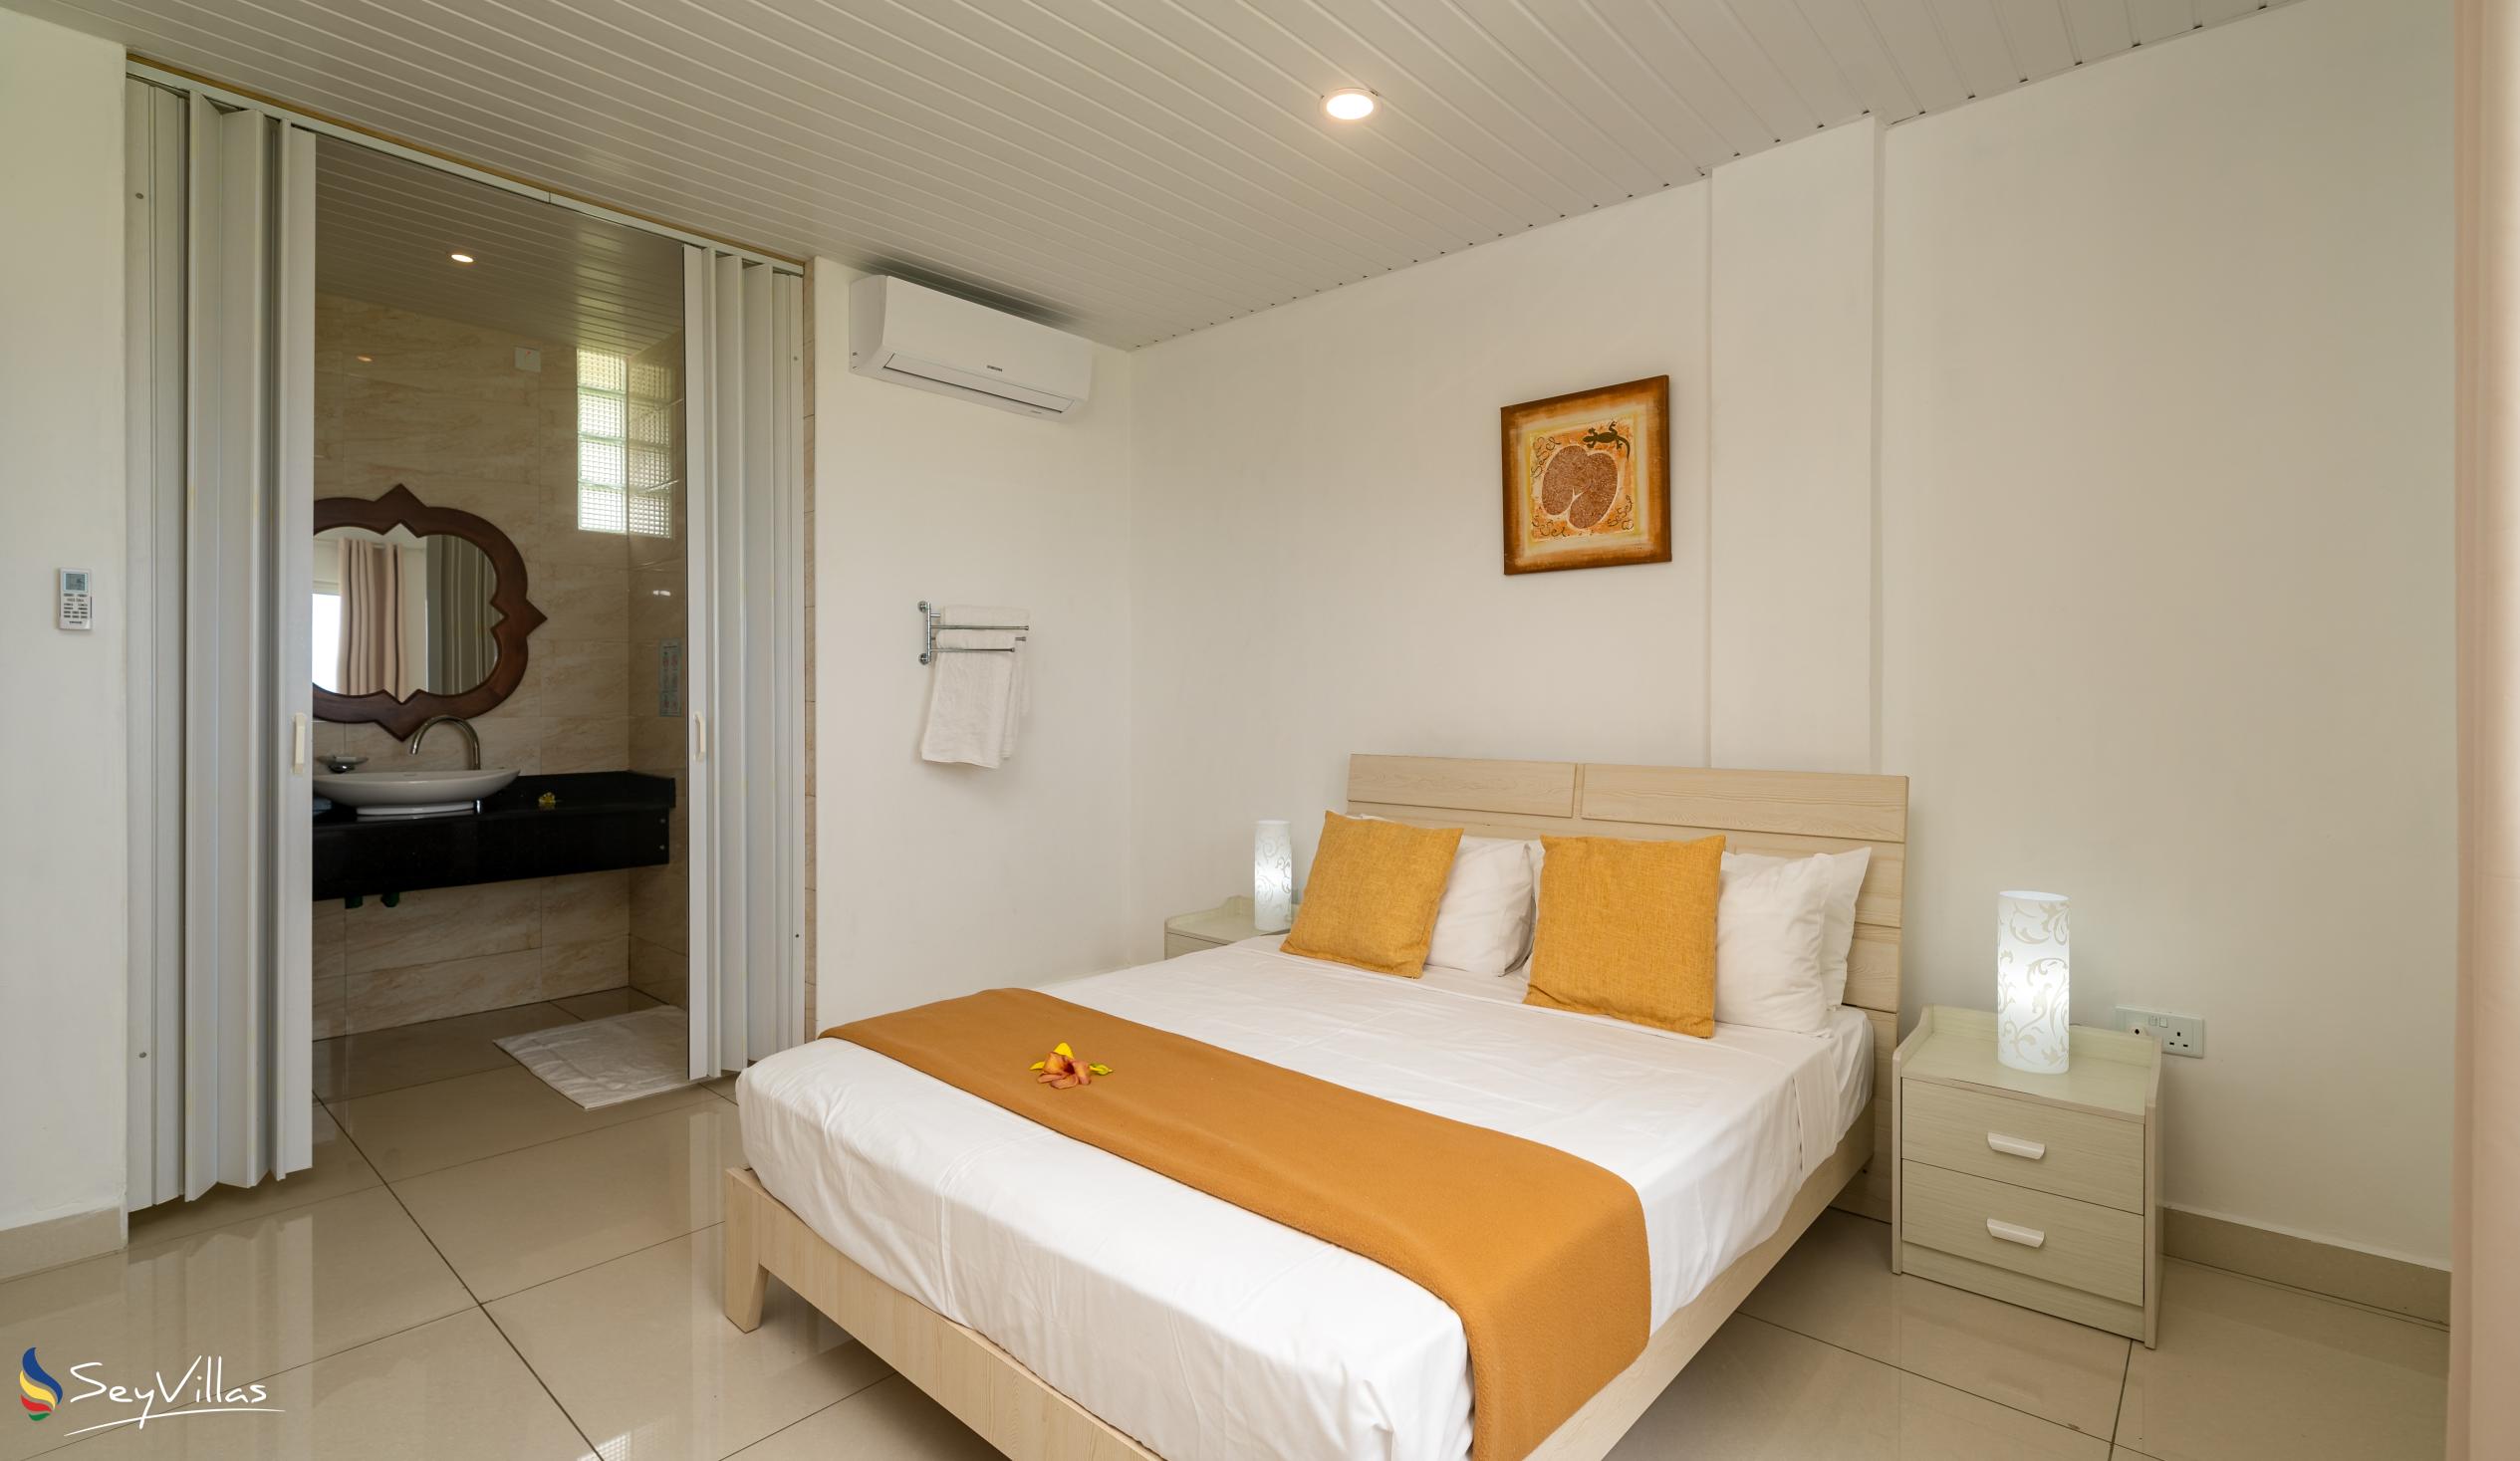 Photo 84: Creole Pearl Self Catering - 2-Bedroom Apartment - Mahé (Seychelles)